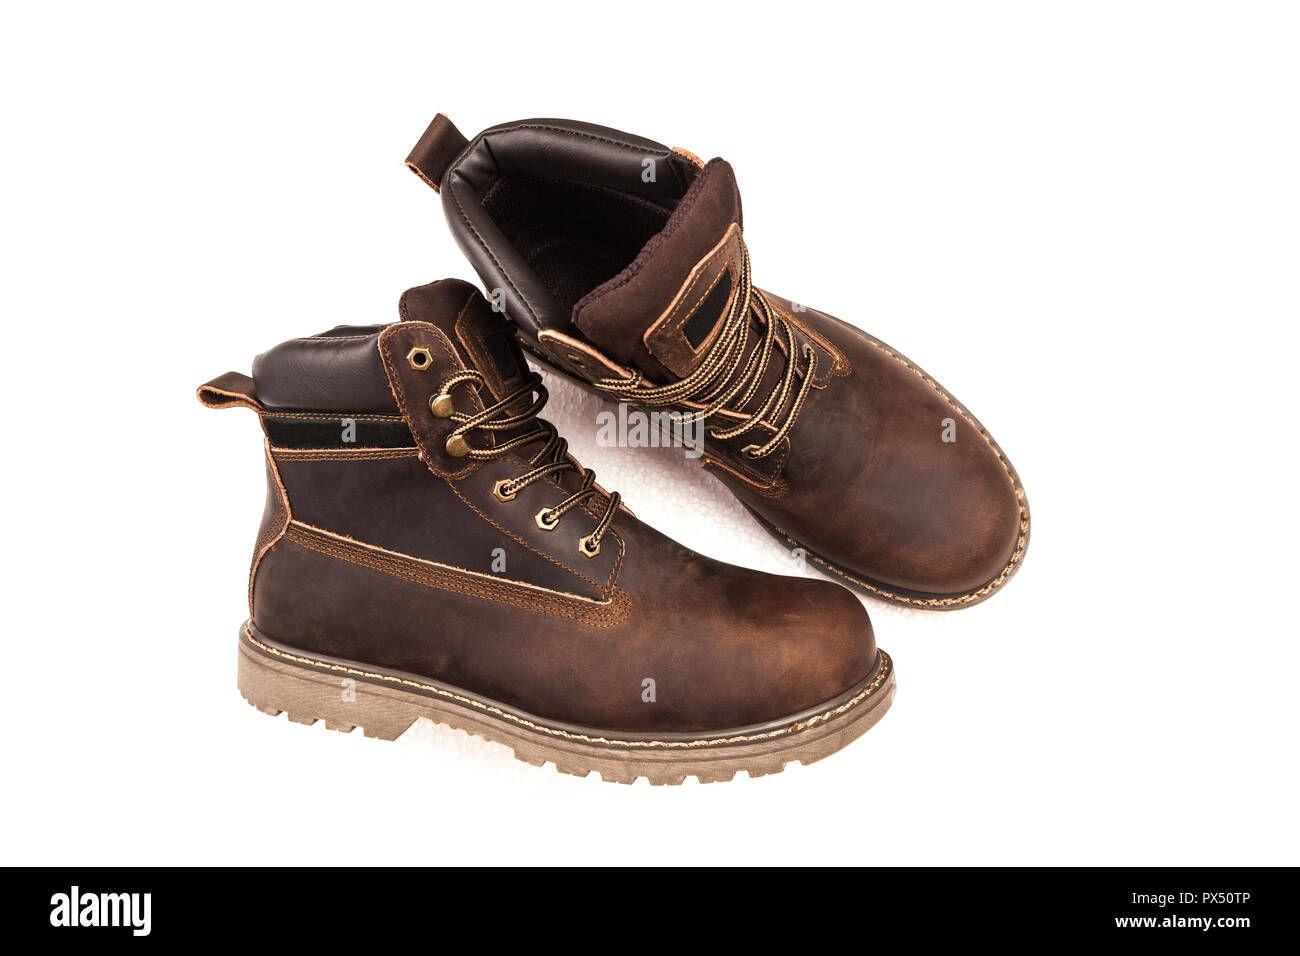 Man ankle boots, brown color, with nubuck leather Stock Photo